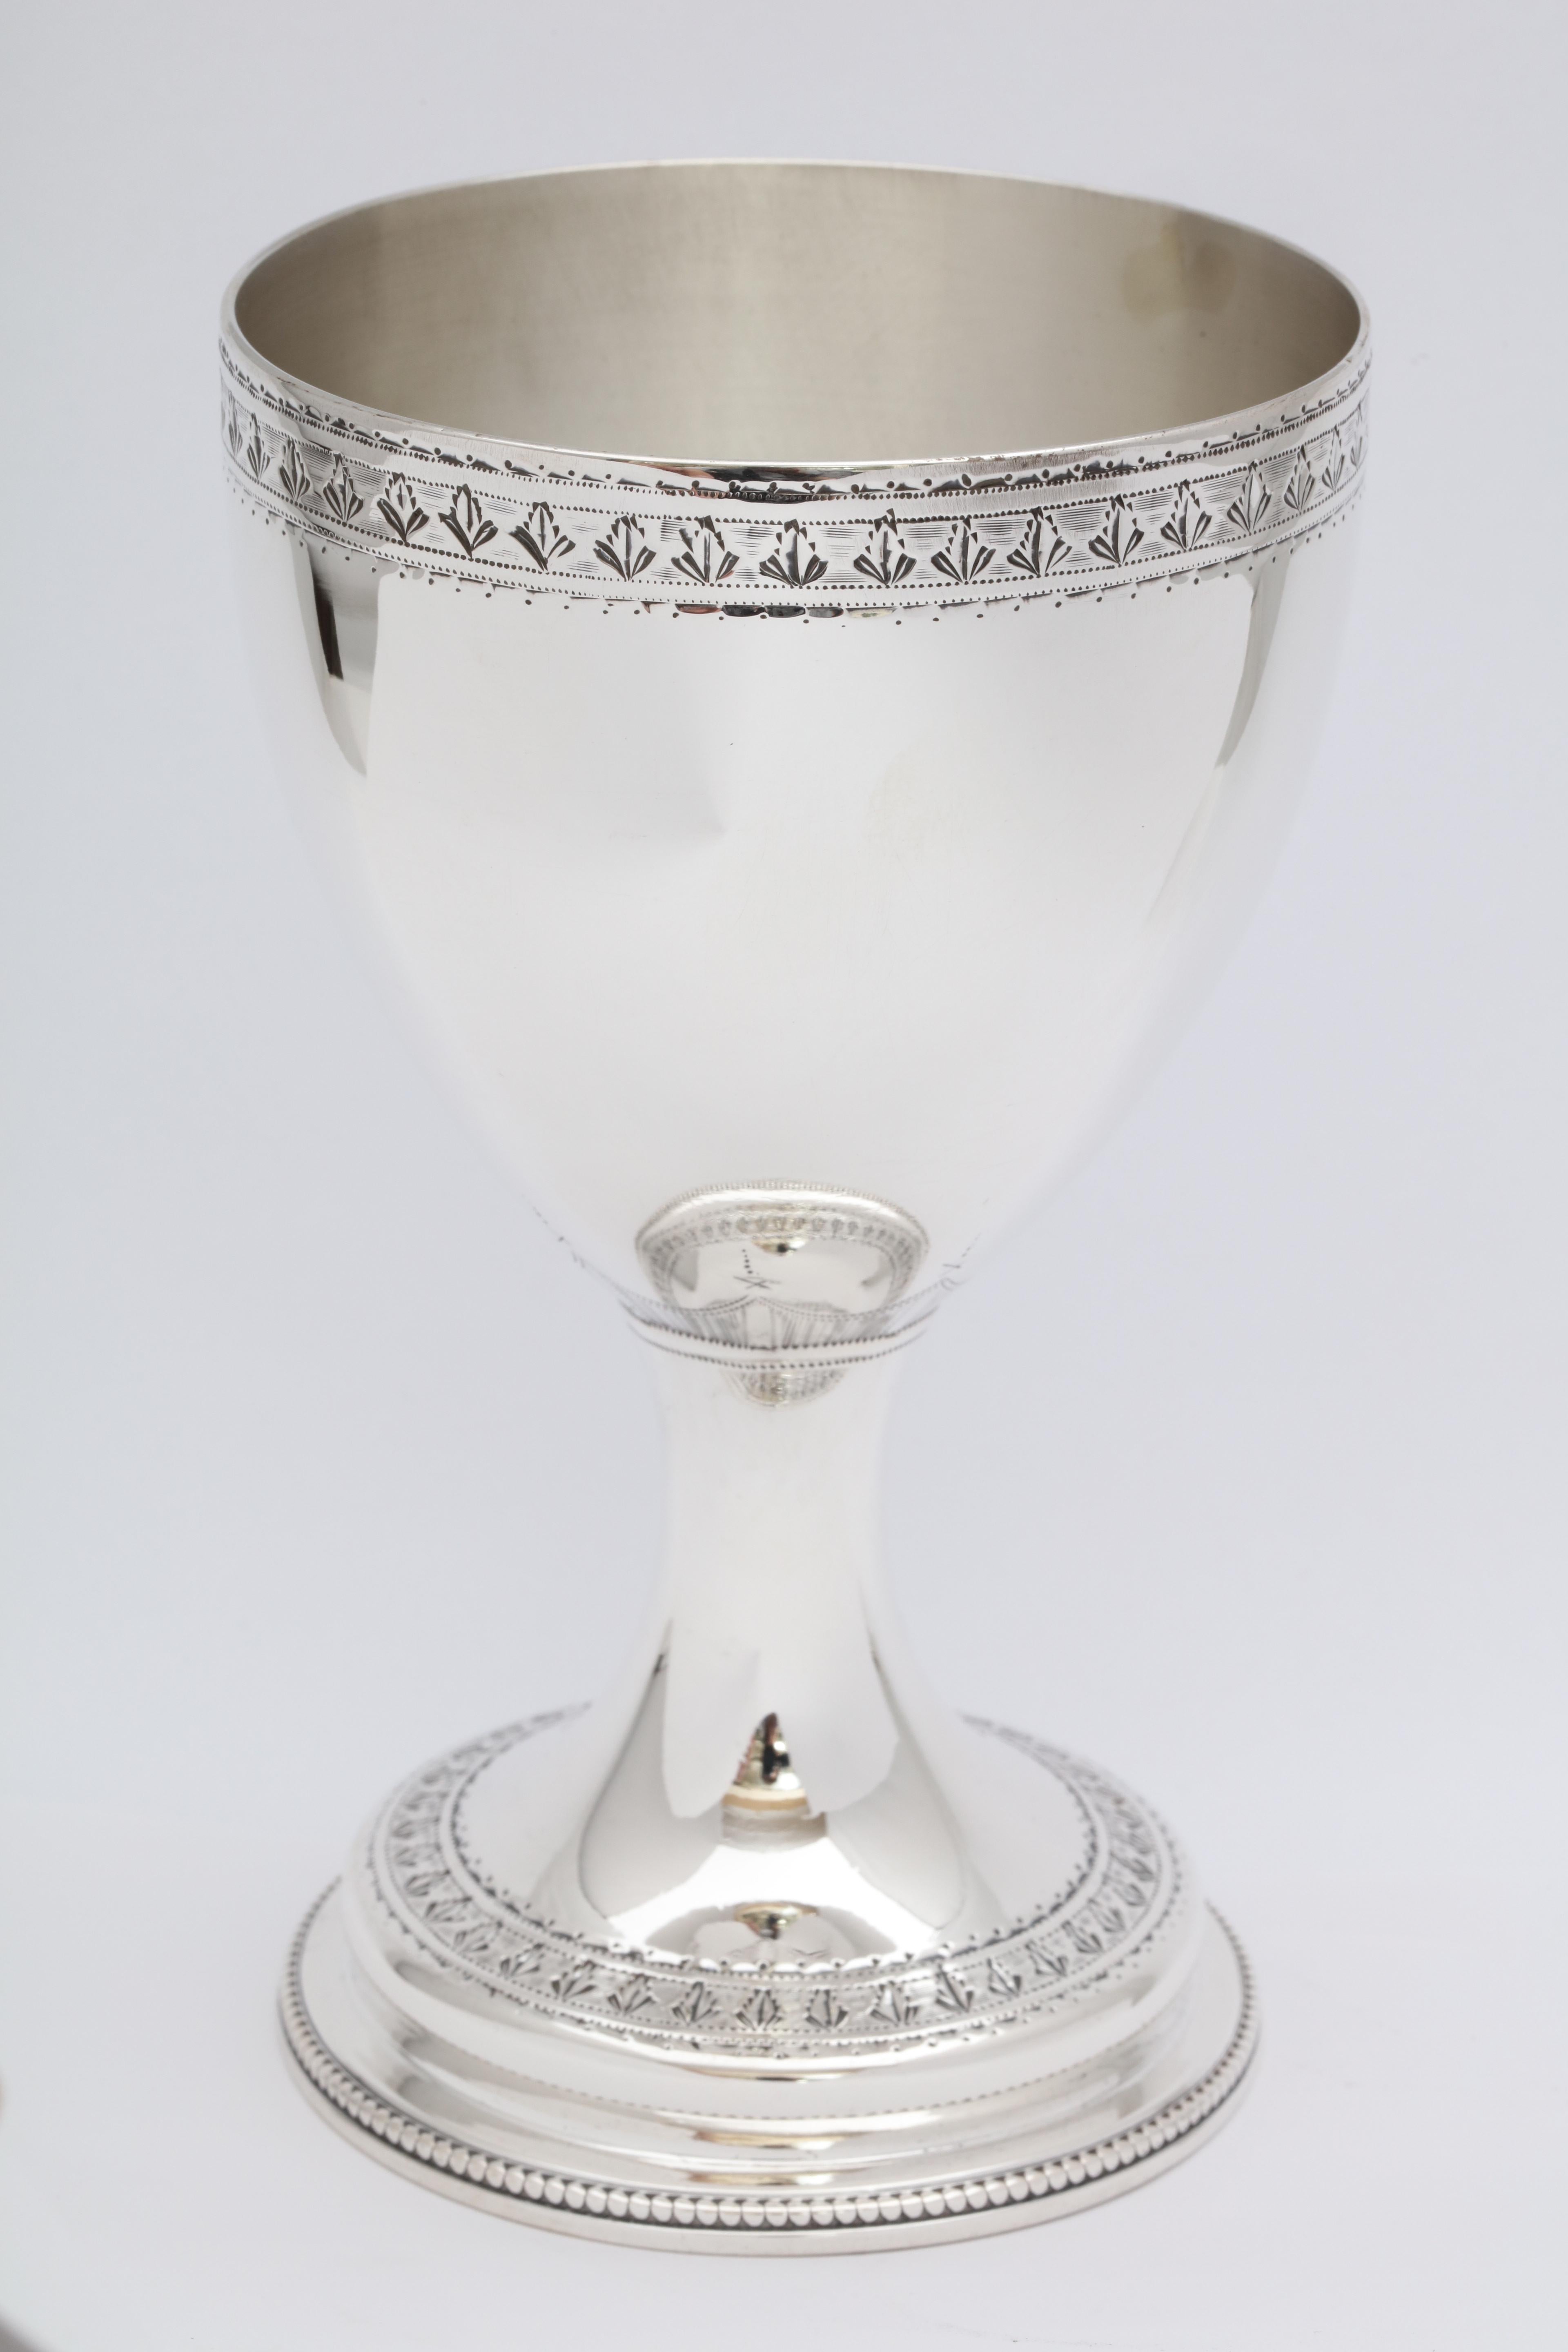 Georgian (George III), sterling silver goblet, London, 1778, Charles Wright - maker. Etched work on rim; etched motif is continued on base. Applied sterling bead work on border of bottom rim. Measures over 5 1/2 inches high x 3 1/2 inches diameter